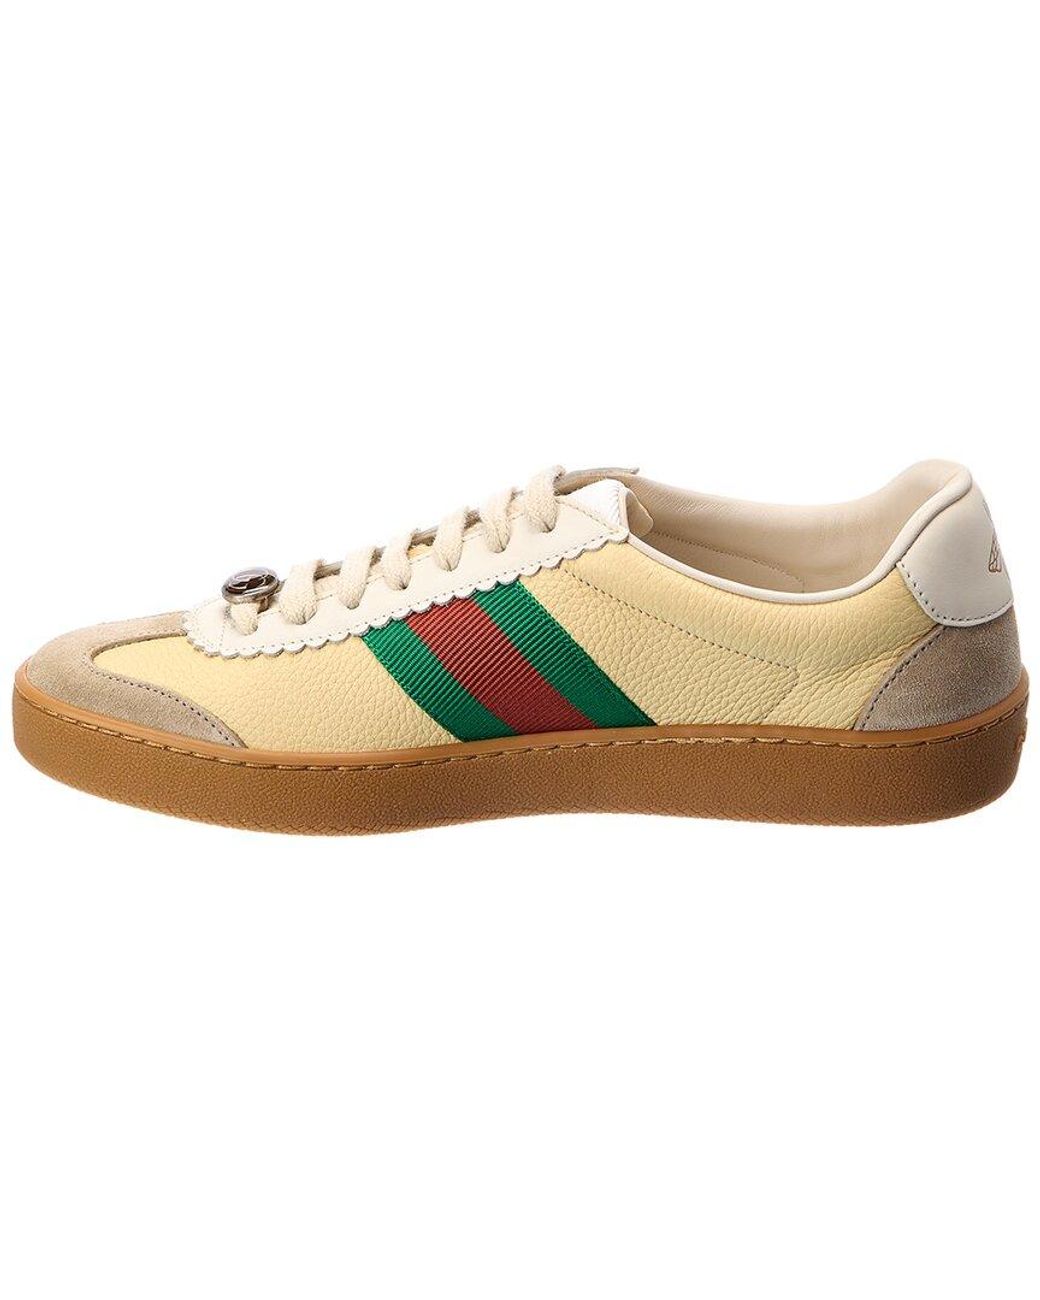 Gucci Web Leather & Suede Sneaker in White | Lyst